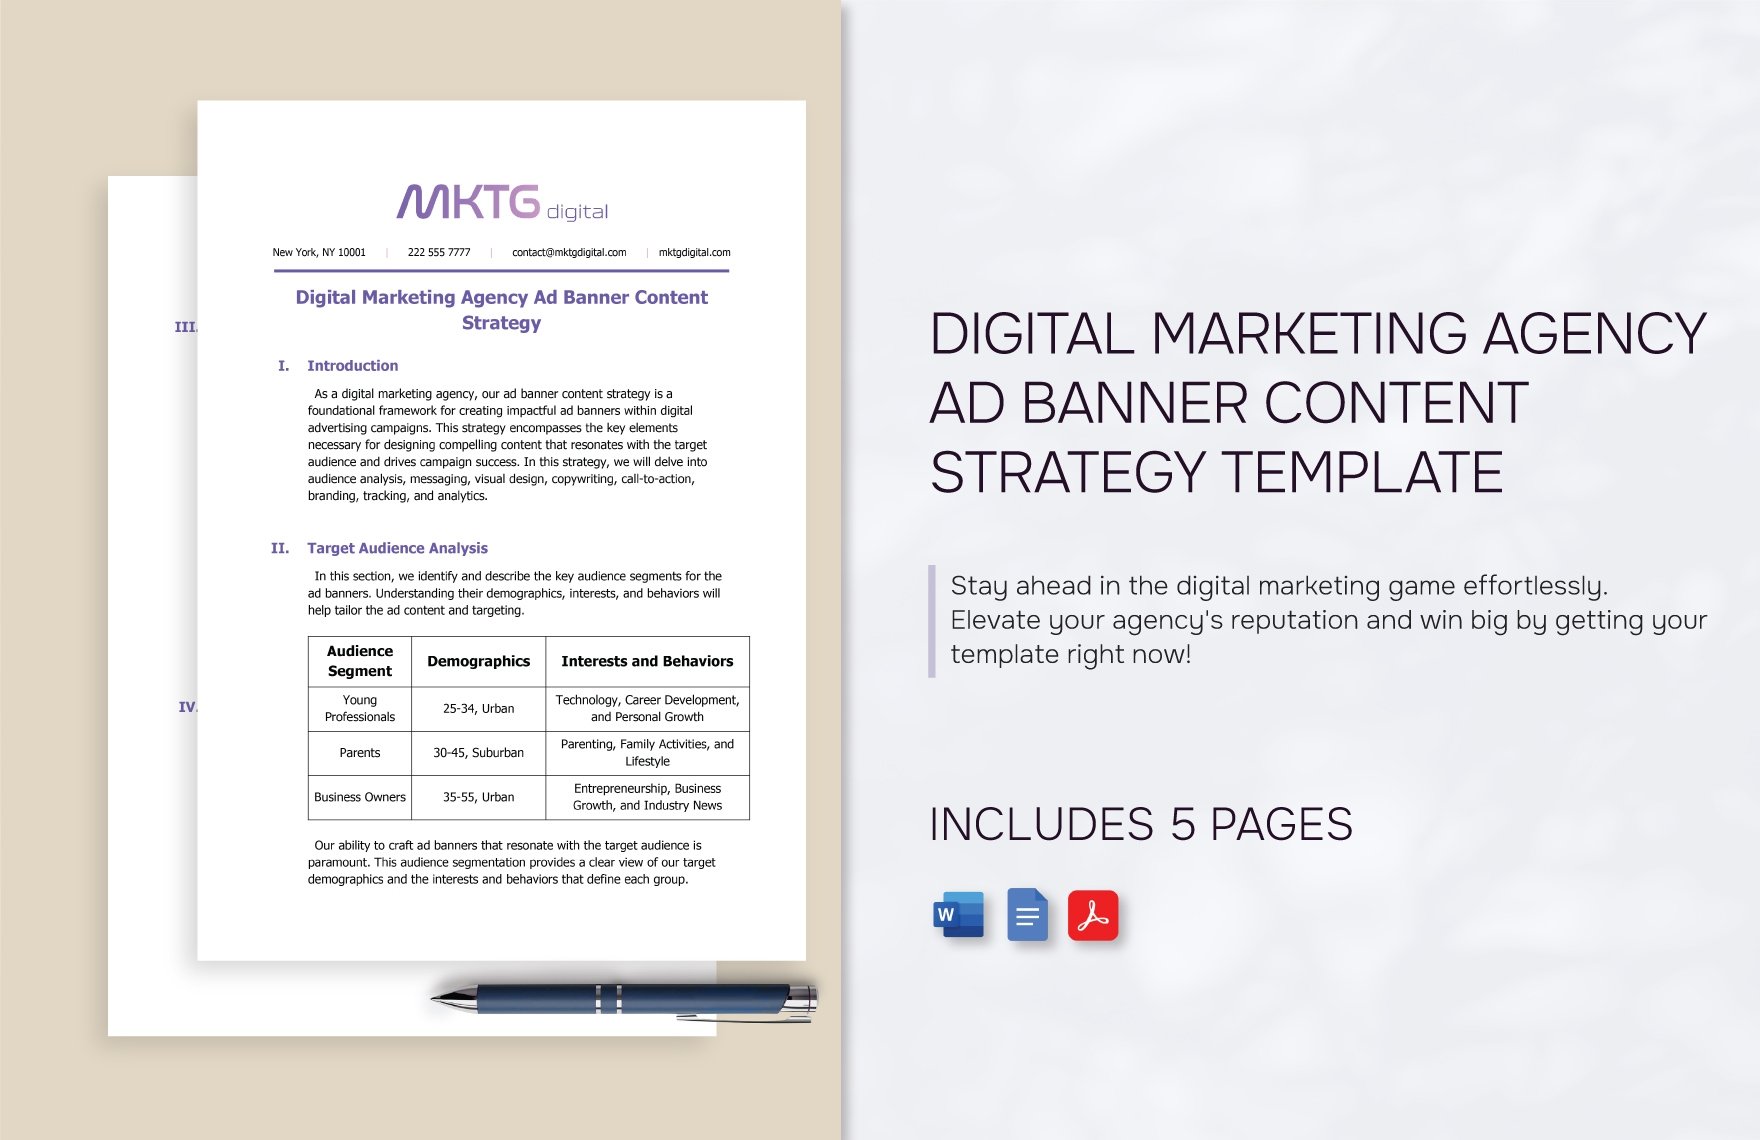 Digital Marketing Agency Ad Banner Content Strategy Template in Word, Google Docs, PDF